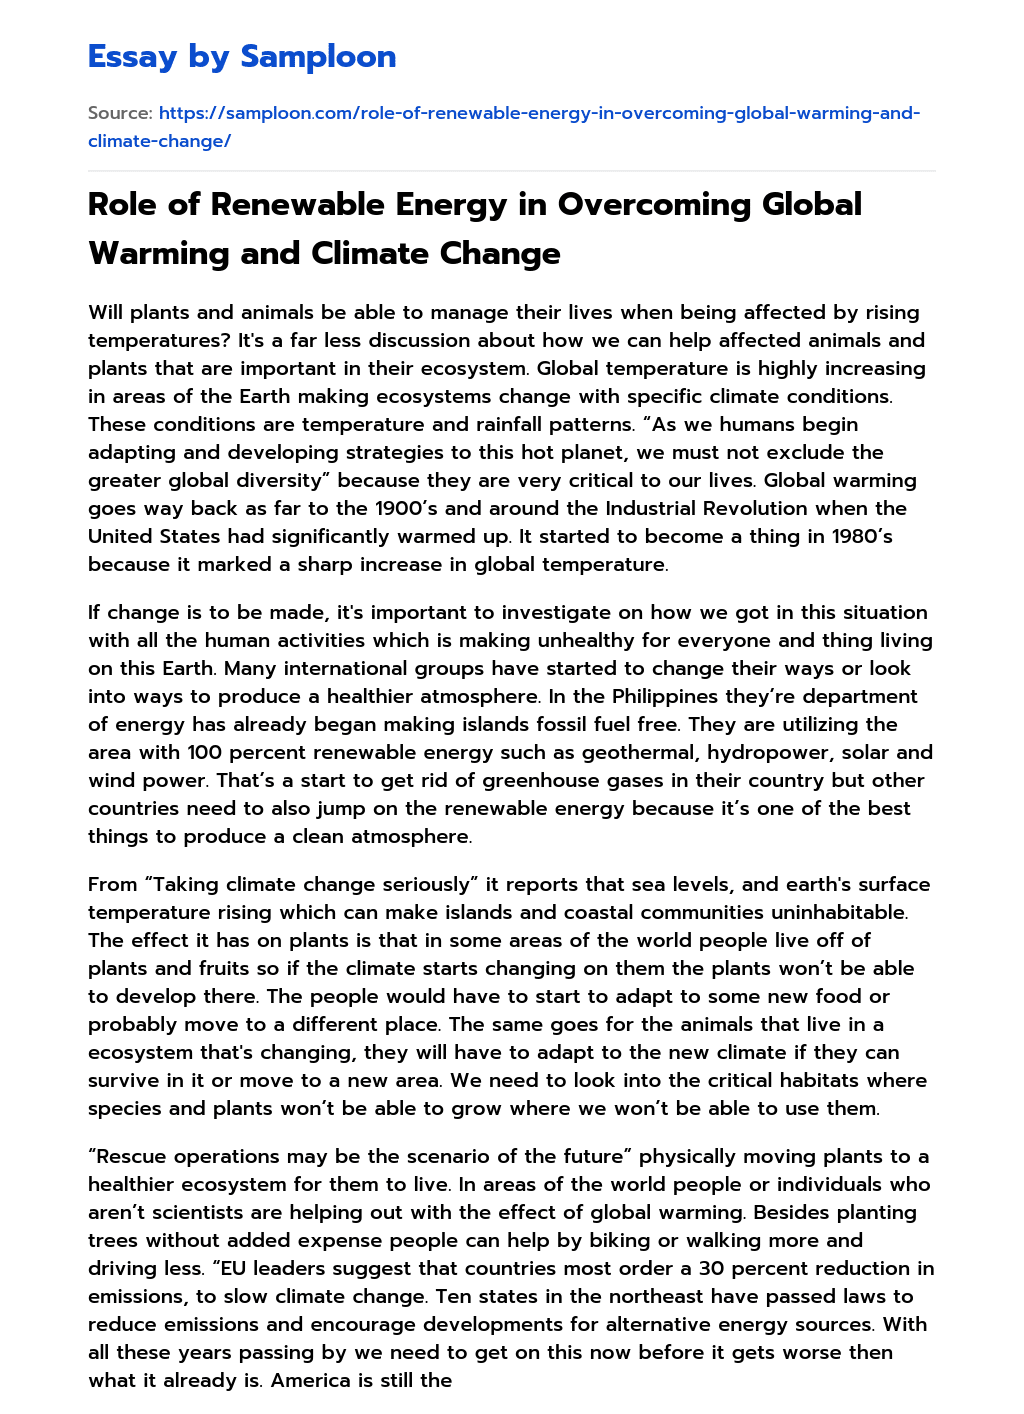 Role of Renewable Energy in Overcoming Global Warming and Climate Change essay